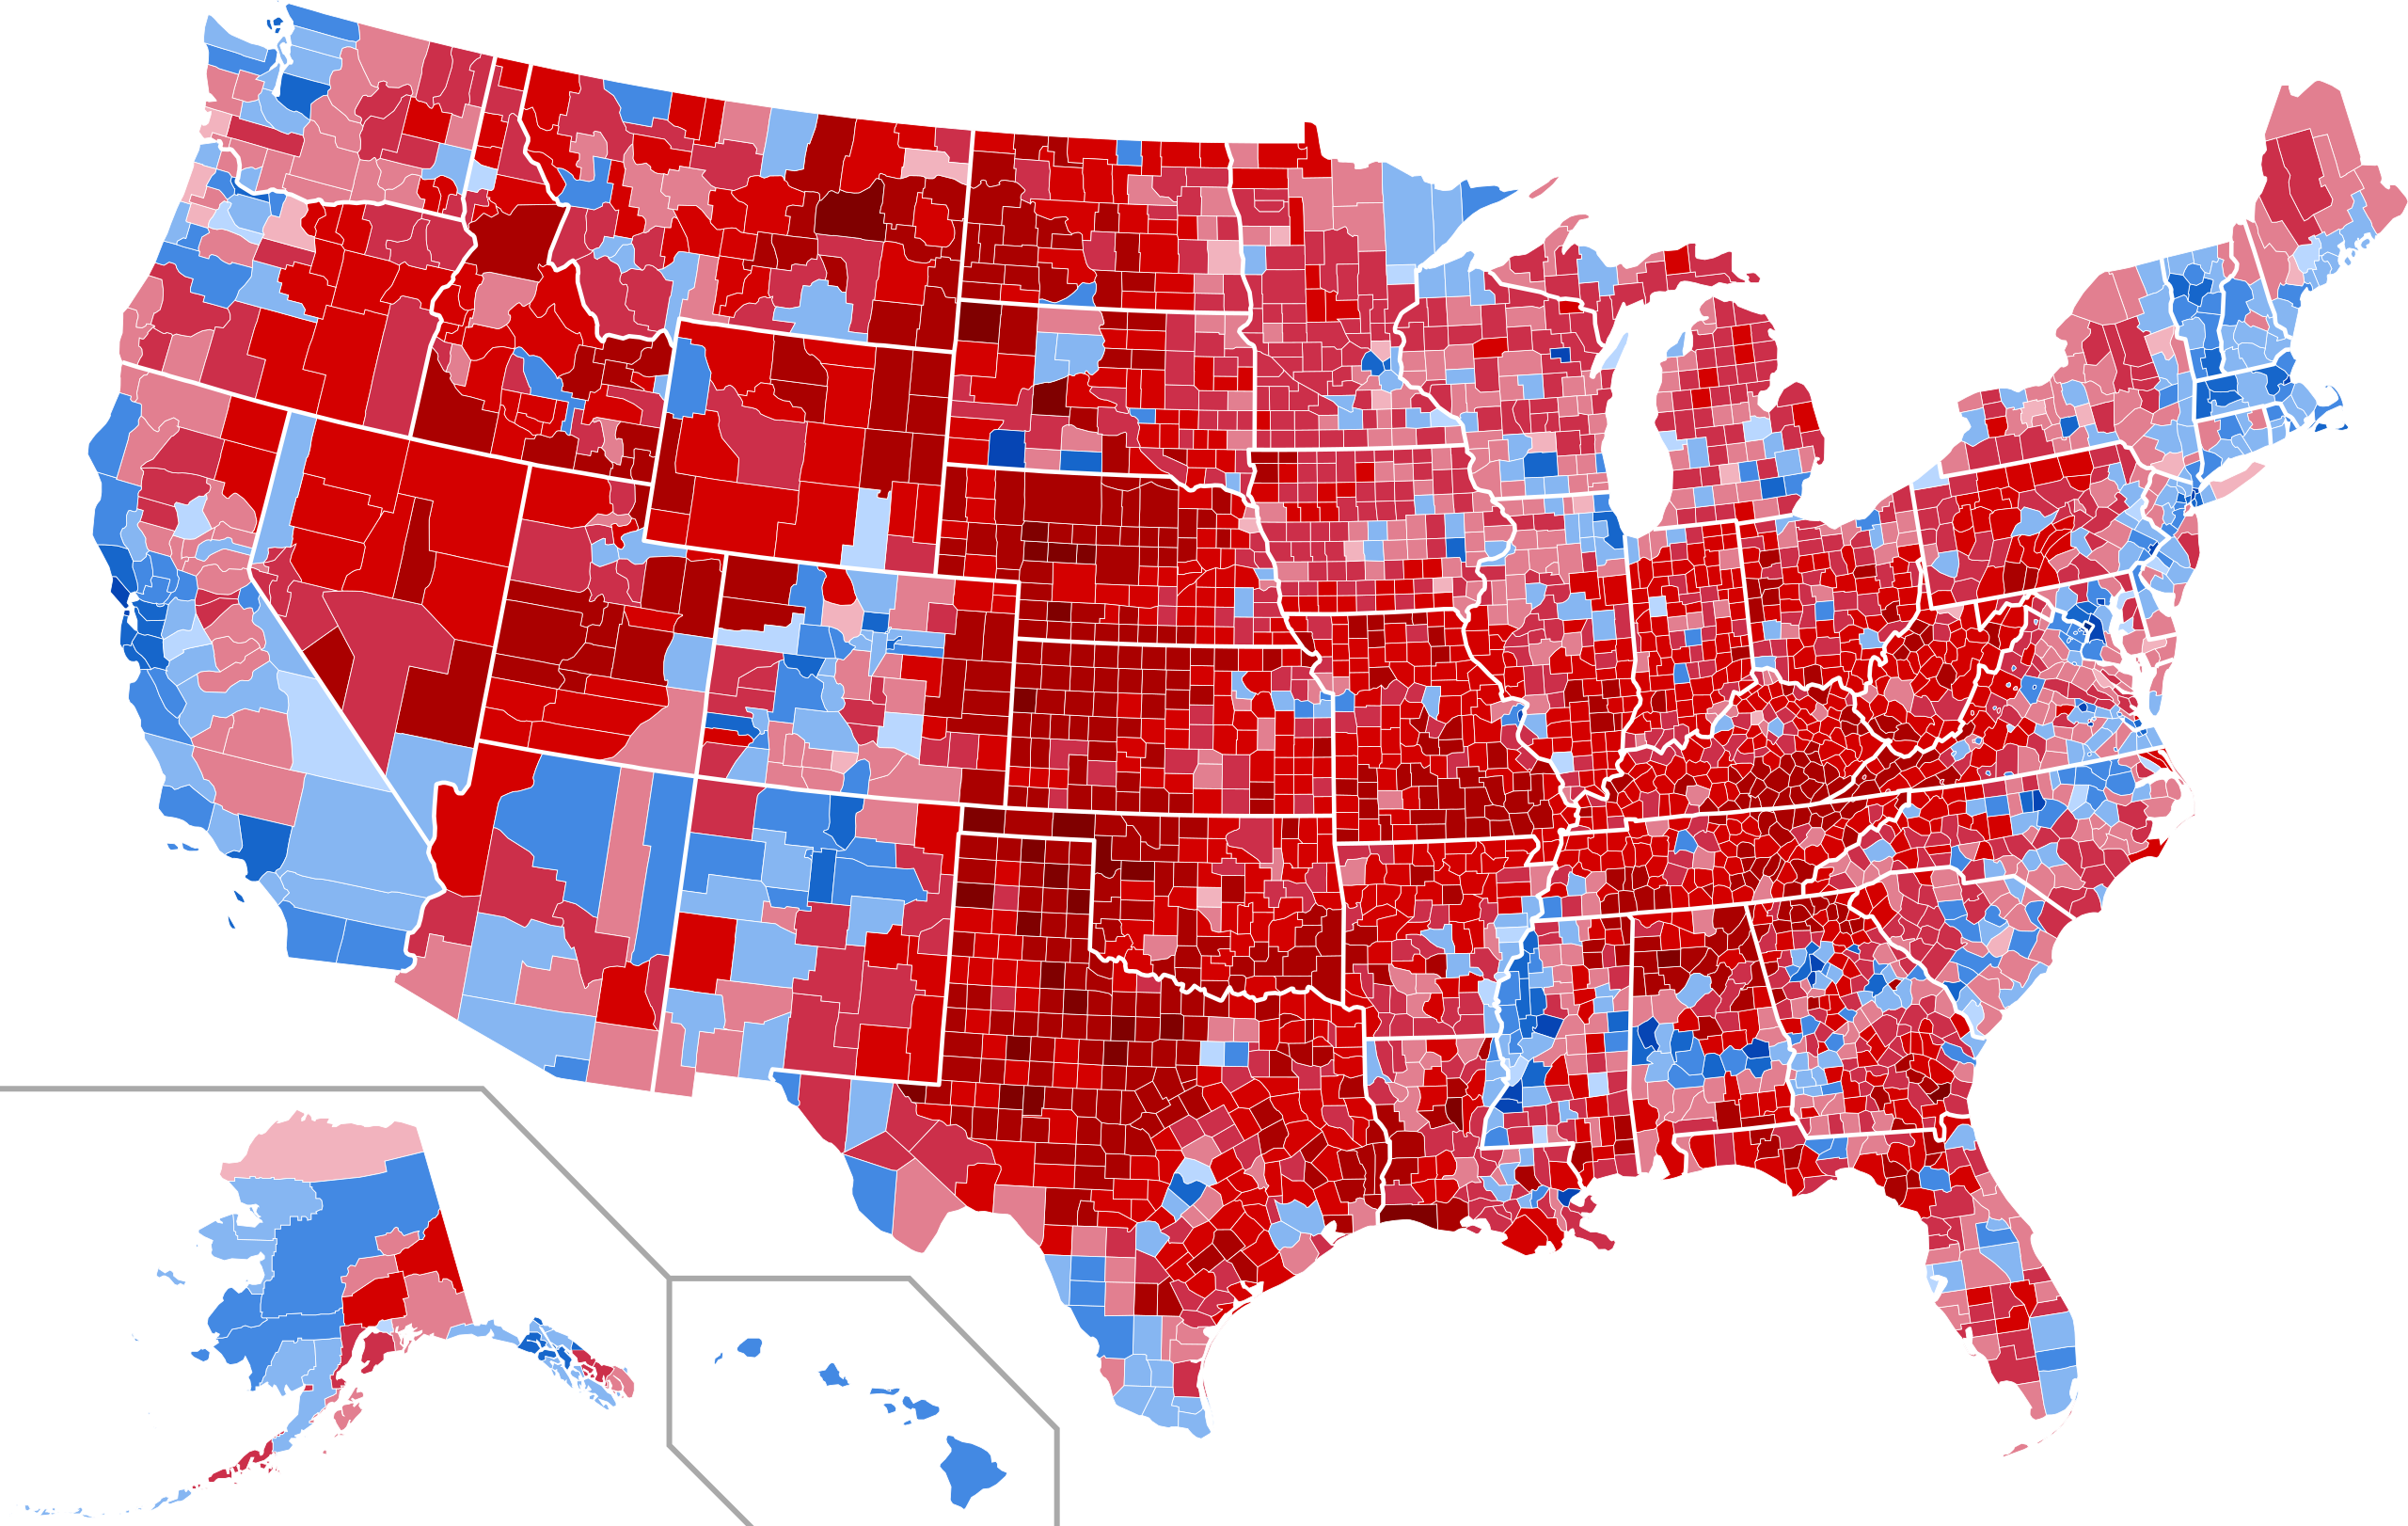 2560px-2020_United_States_presidential_election_results_map_by_county.svg.png